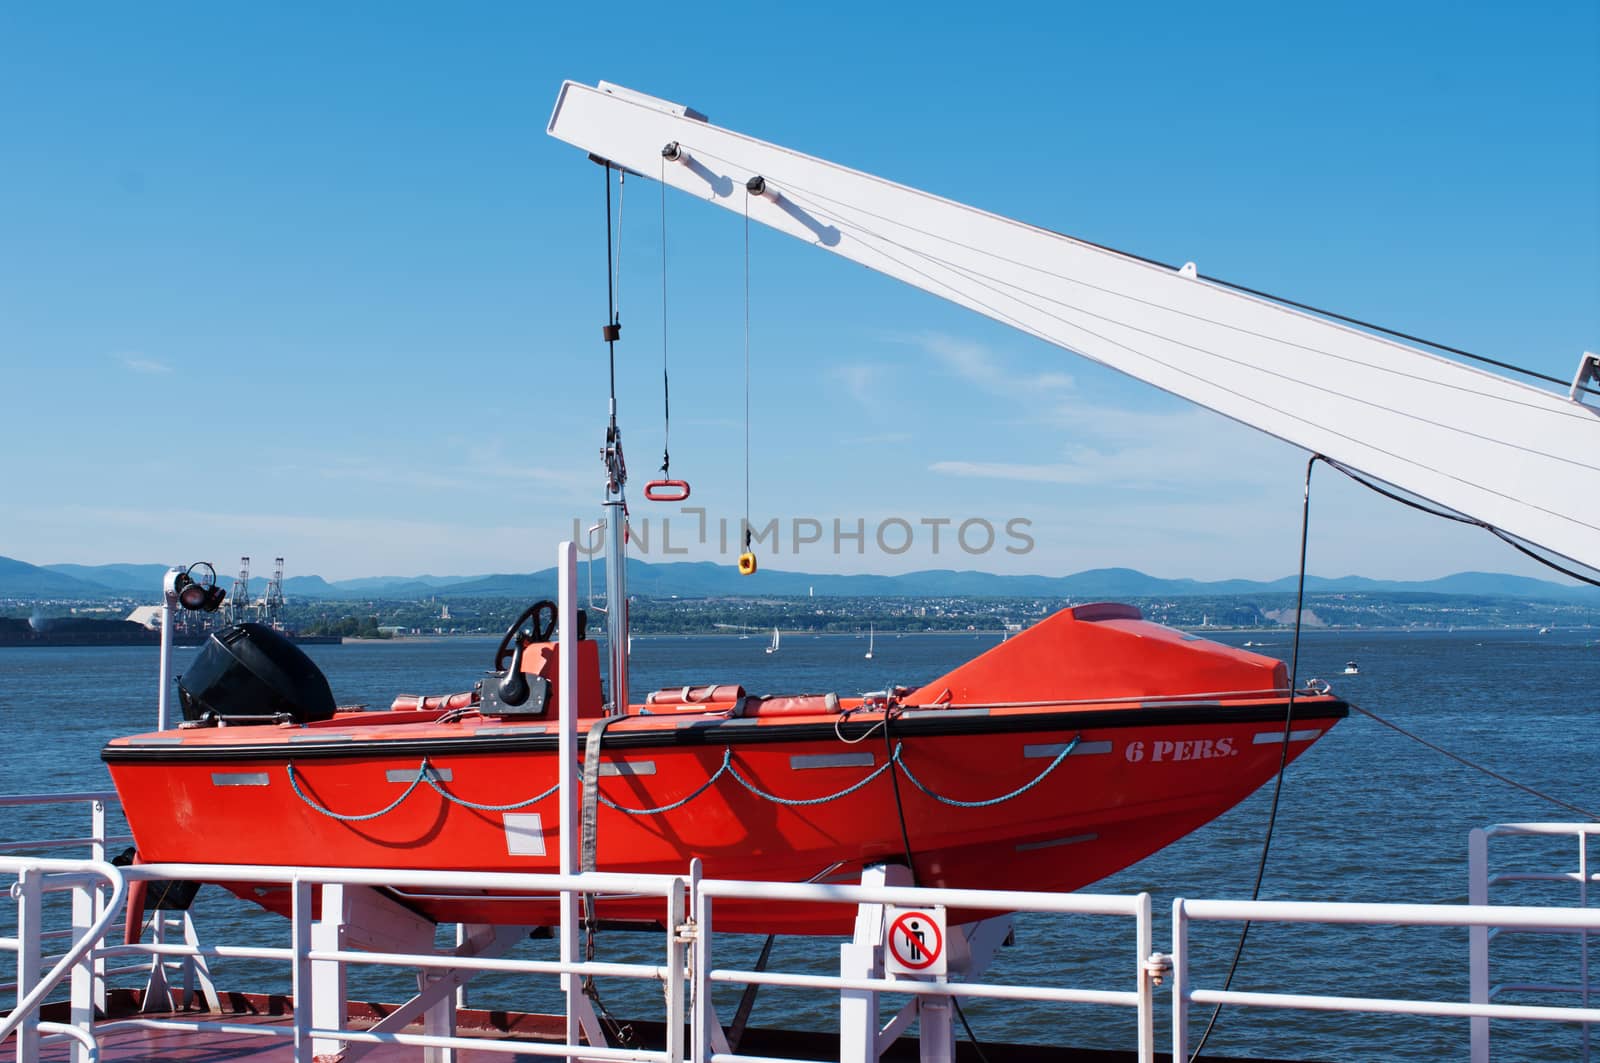 Lifeboat hanging a deck of cruise ship by daoleduc